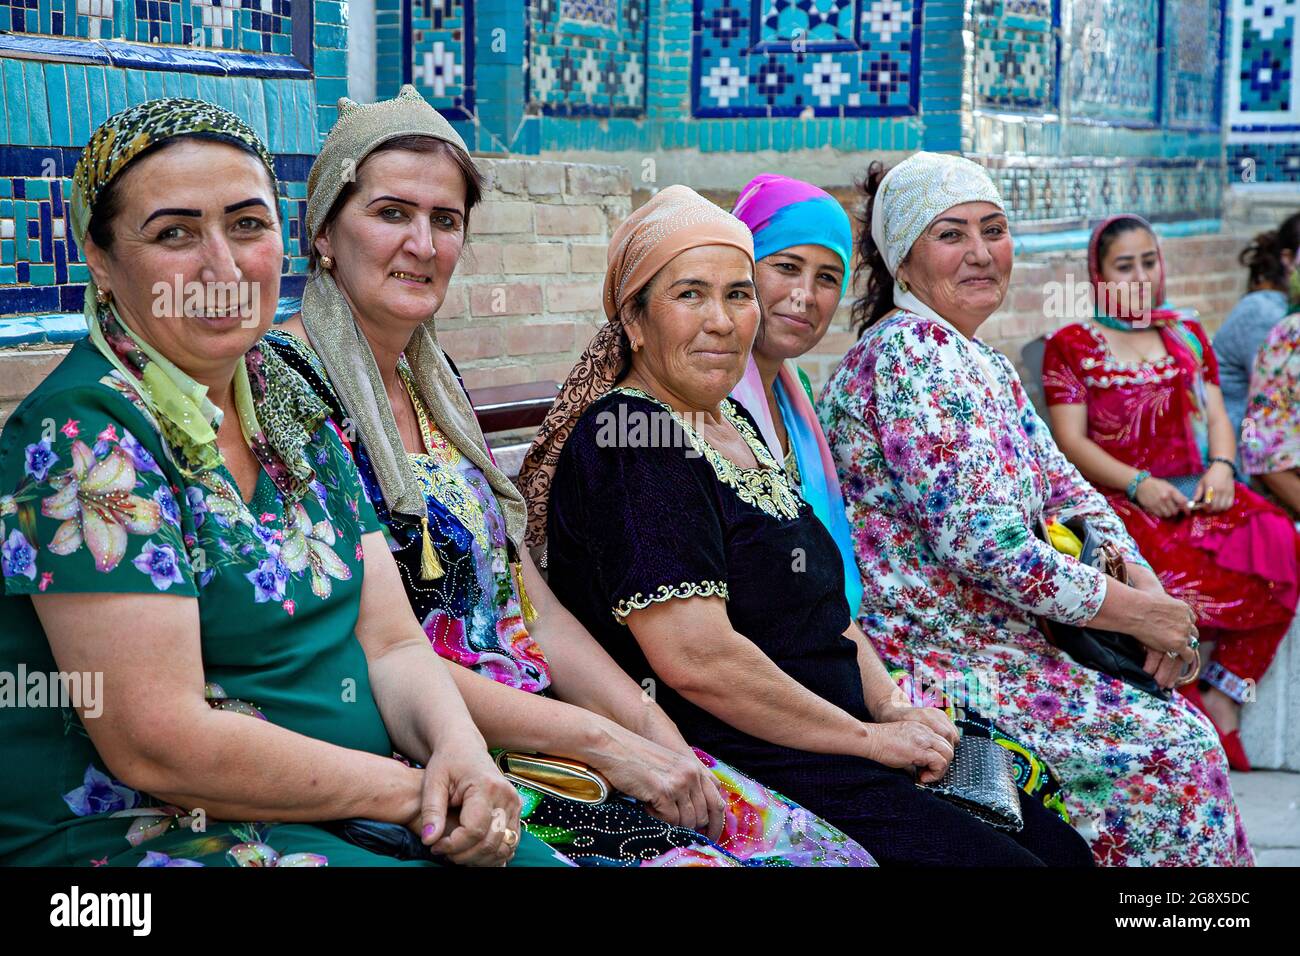 Women in colorful, traditional dresses sitting and resting in the courtyard of Shahi Zinda religious complex in Samarkand, Uzbekistan. Stock Photo